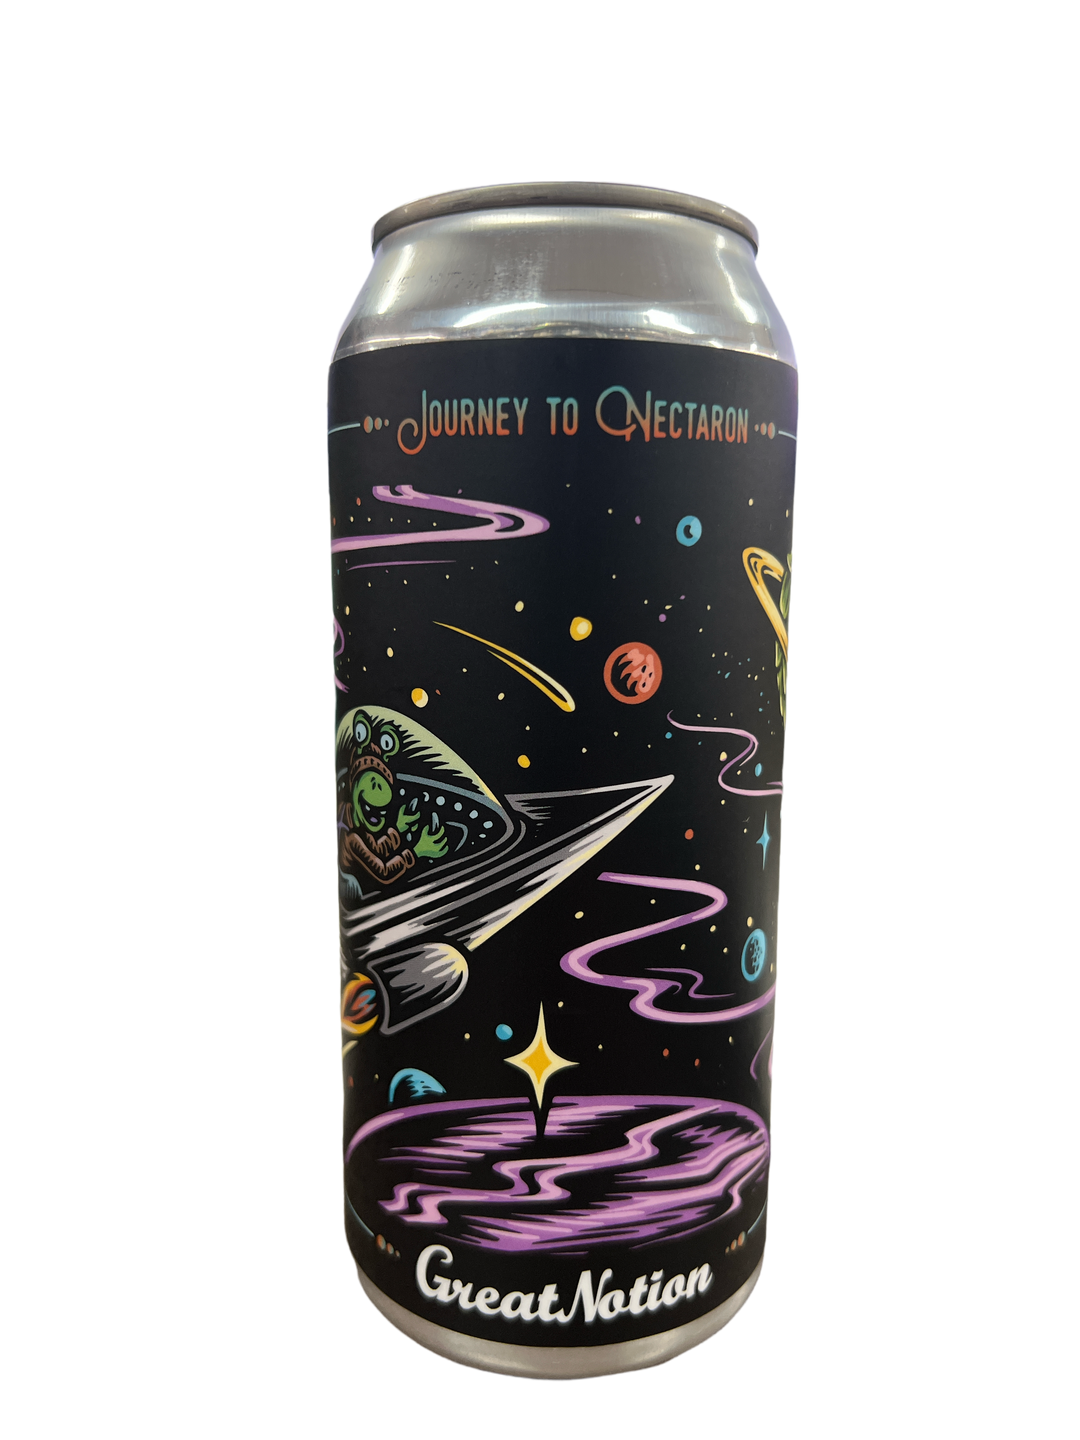 Buy Great Notion Journey to Nectaron Online -Craft City